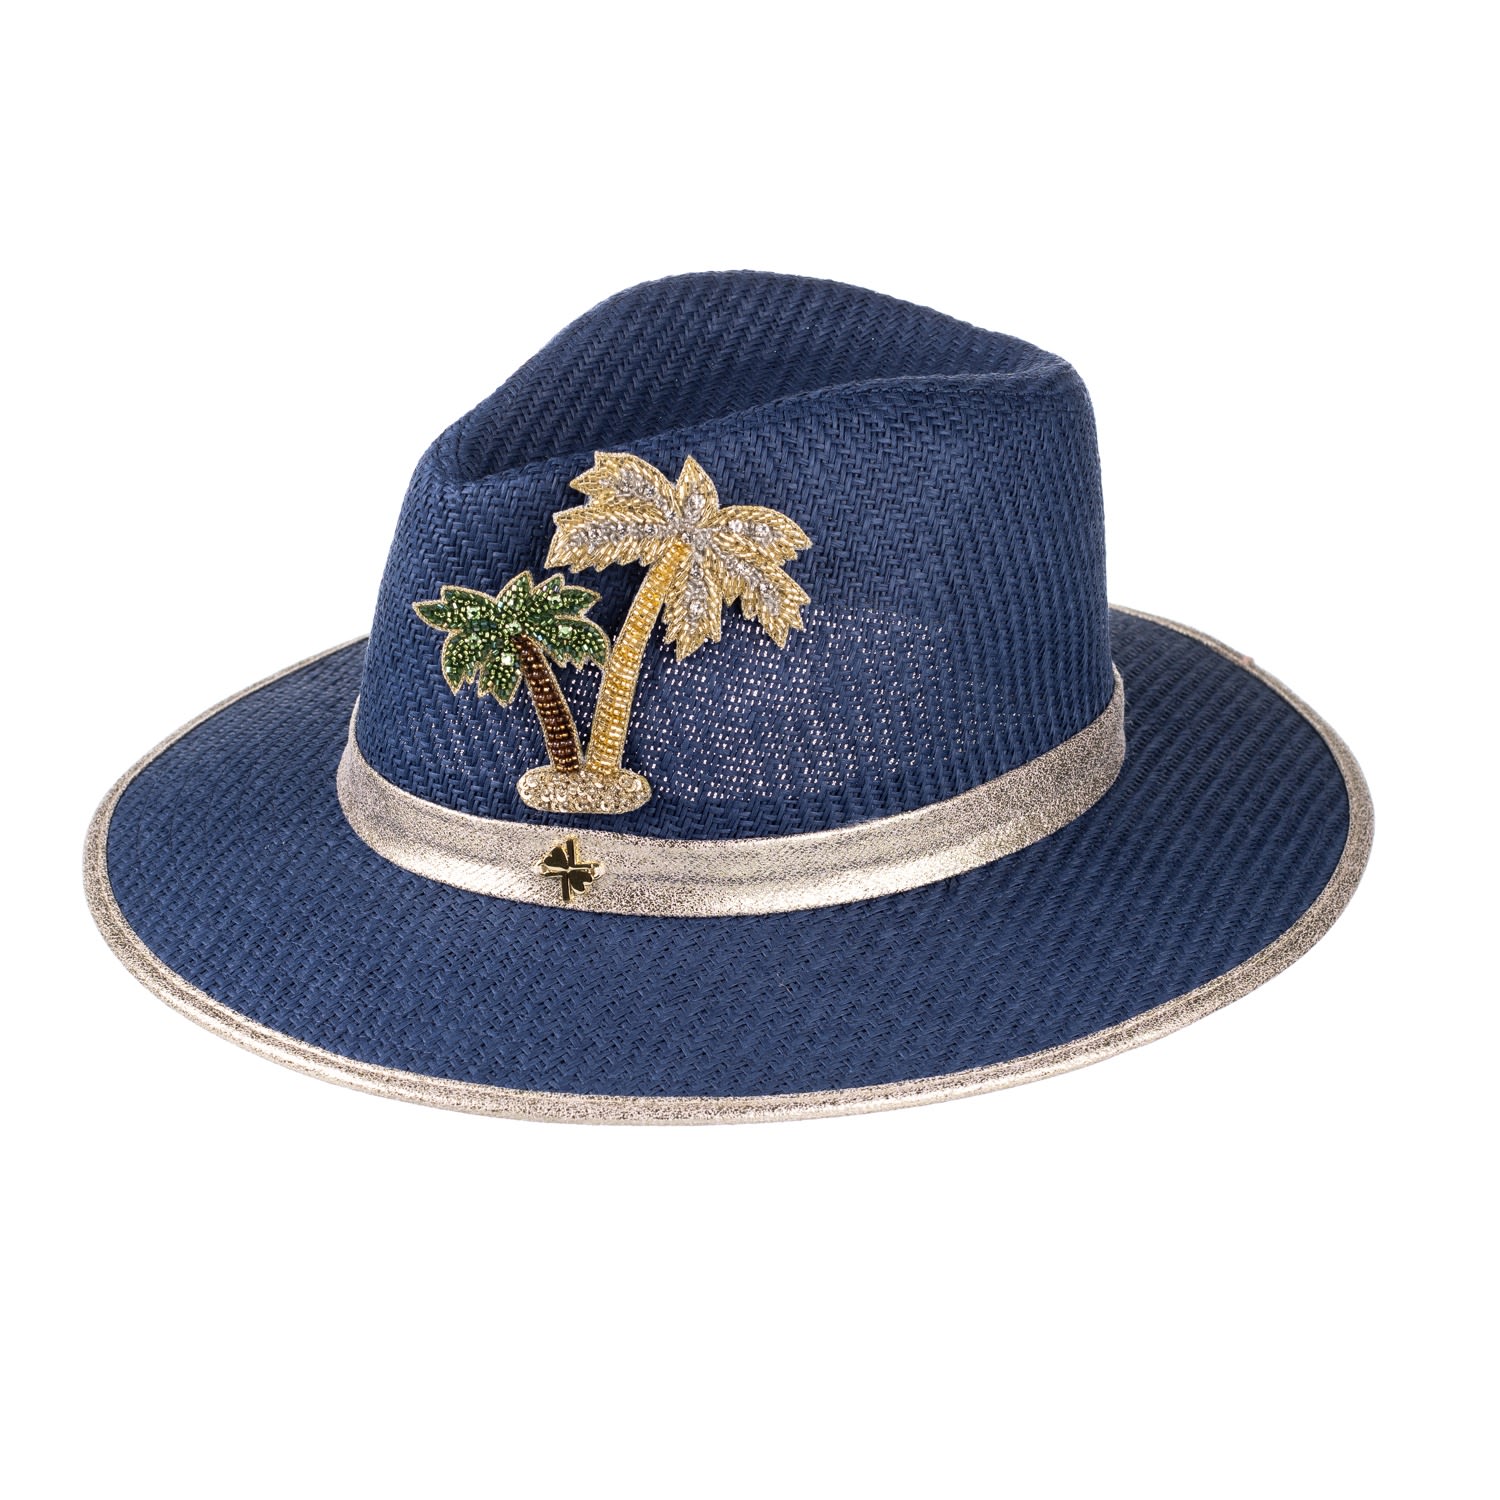 Women’s Blue Straw Woven Hat With Couture Embellished Golden Palm Tree Brooch - Navy One Size Laines London